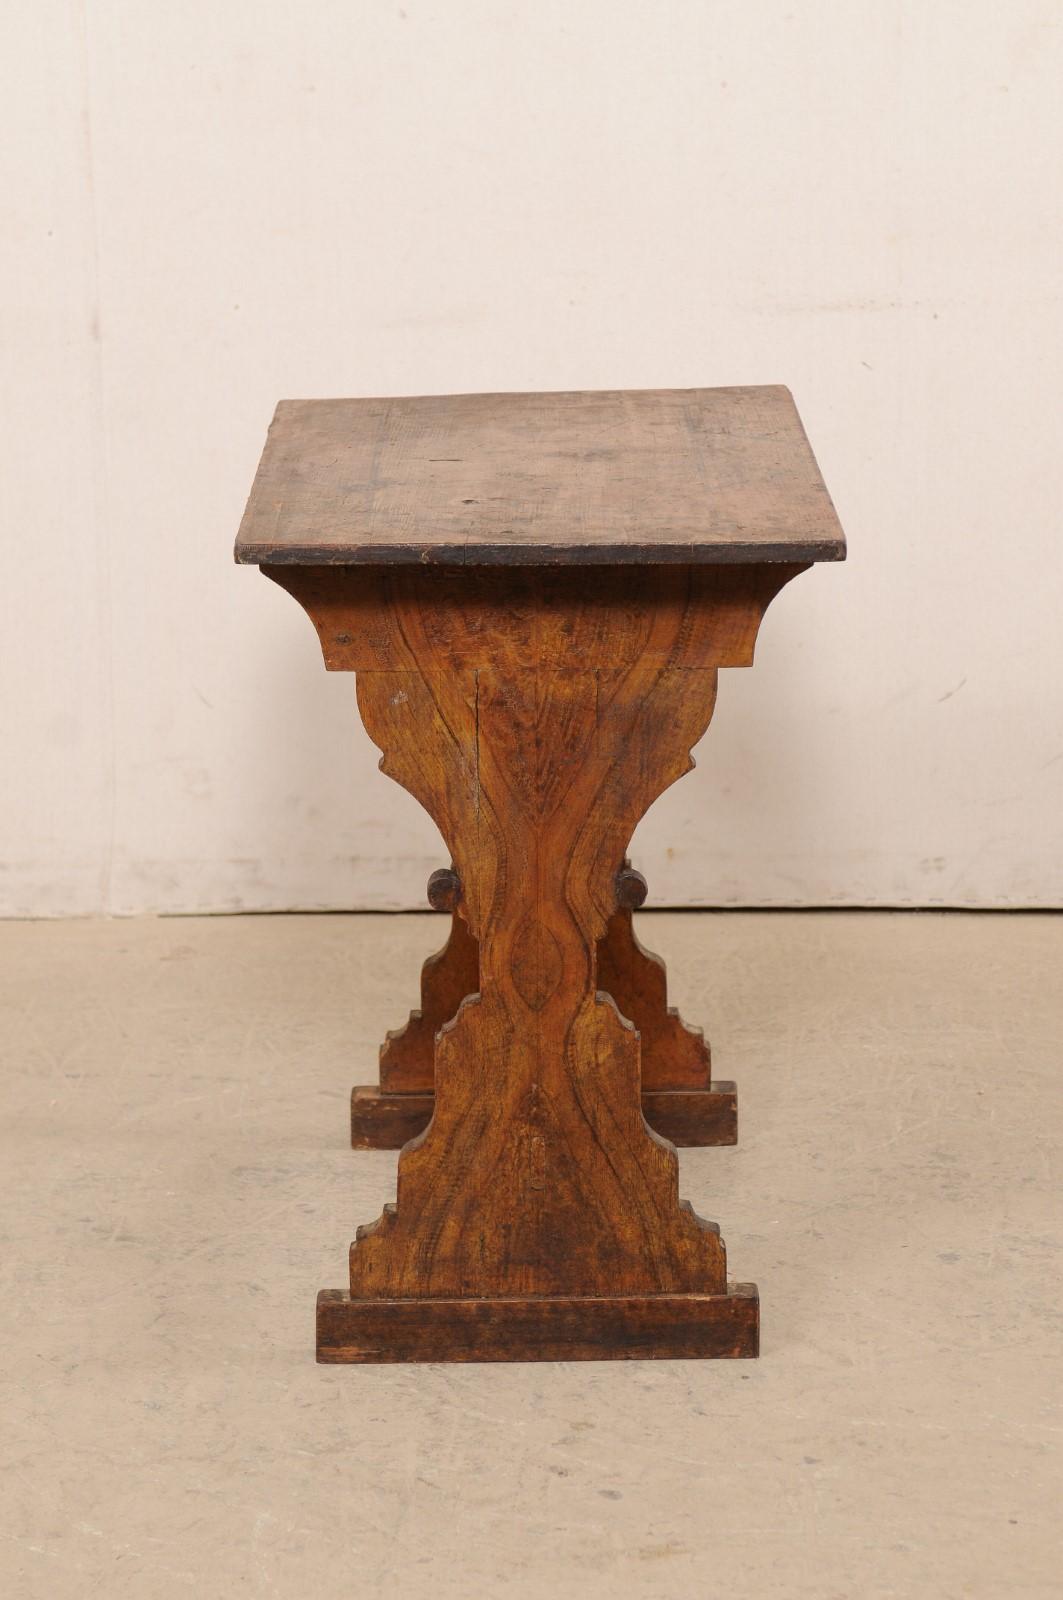 Italian Smaller-Sized Table or Writing Desk w/Shapely Hourglass Legs, 19th C. For Sale 2